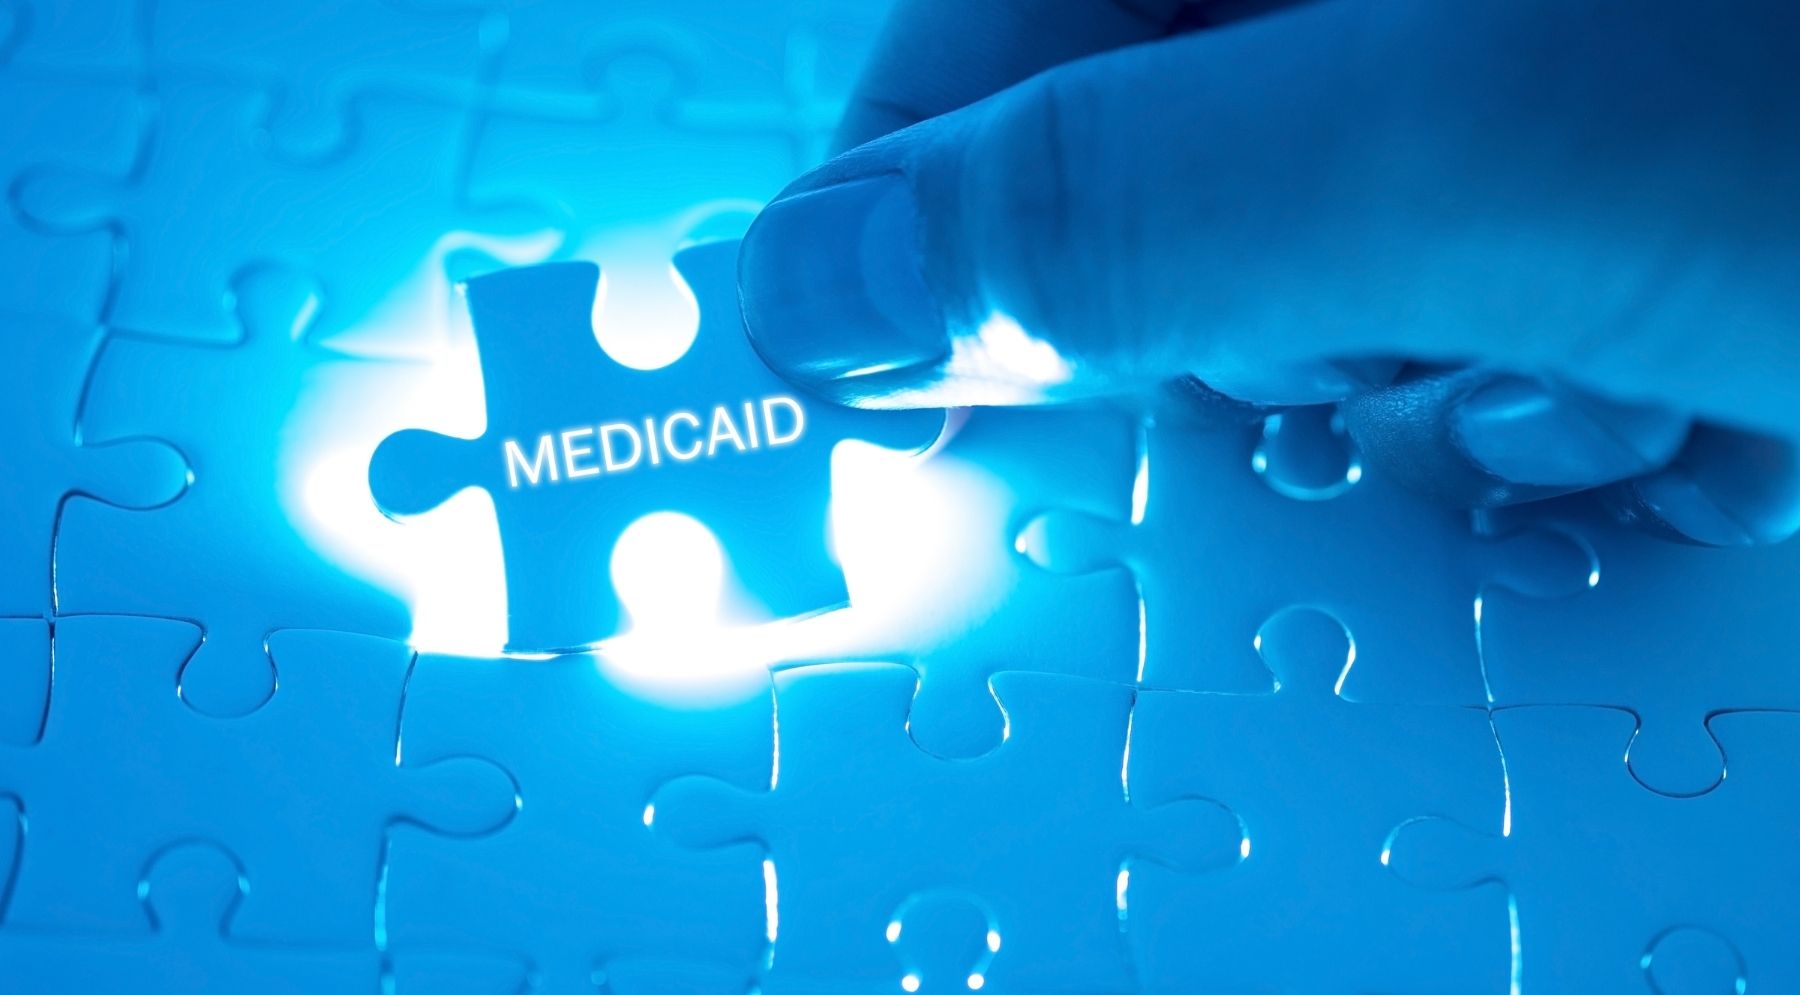 Medicaid as a puzzle piece